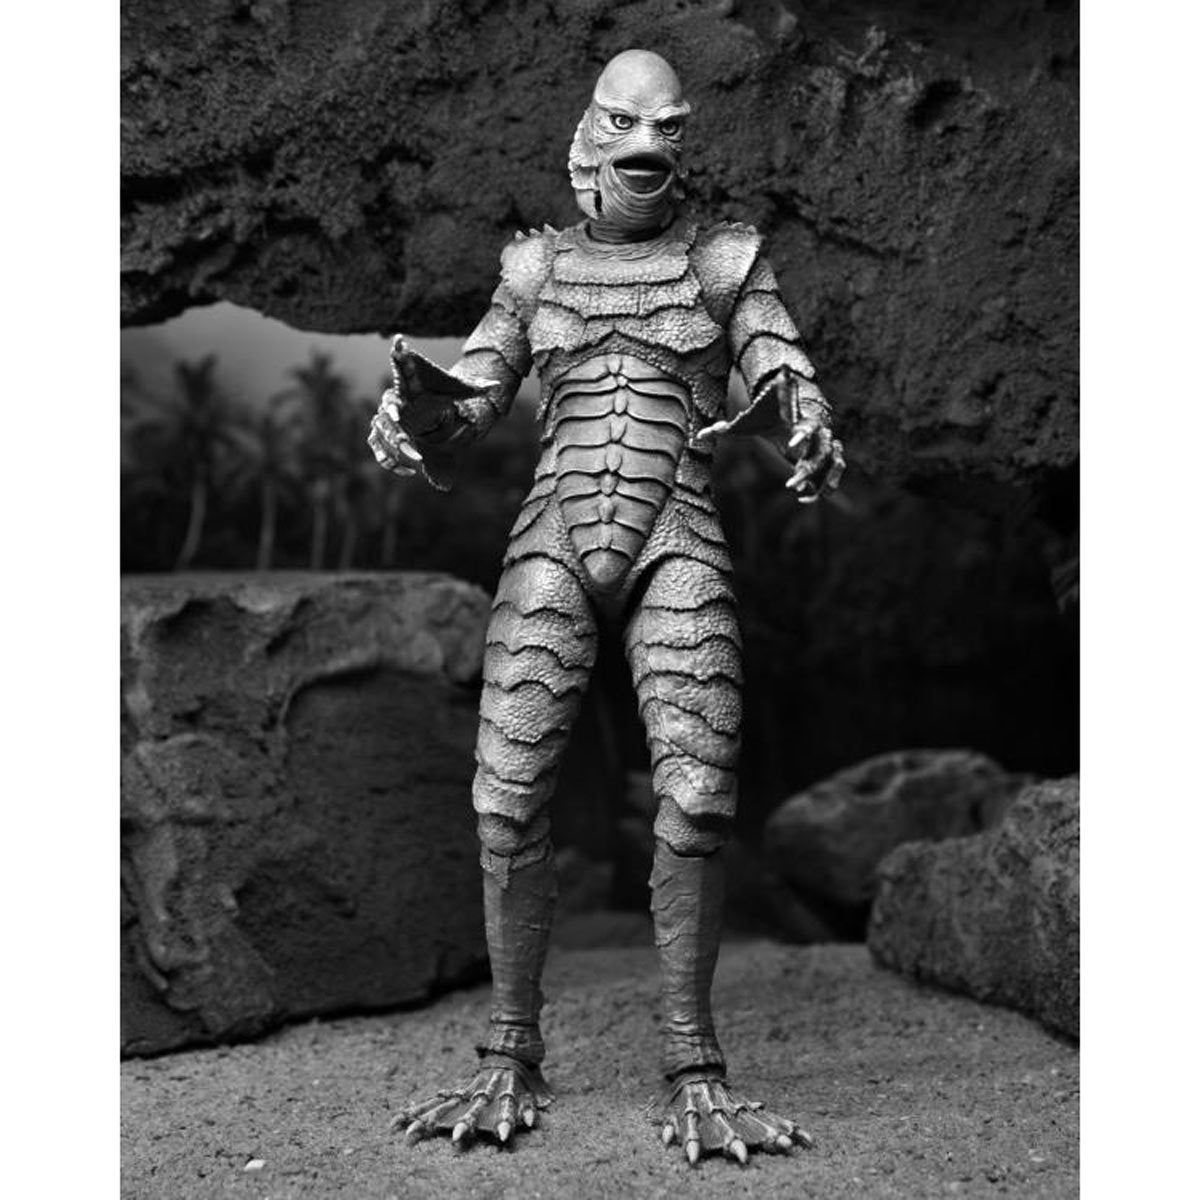 NECA Universal Monsters Ultimate Creature from the Black Lagoon Black and White Version 7-Inch Action Figure